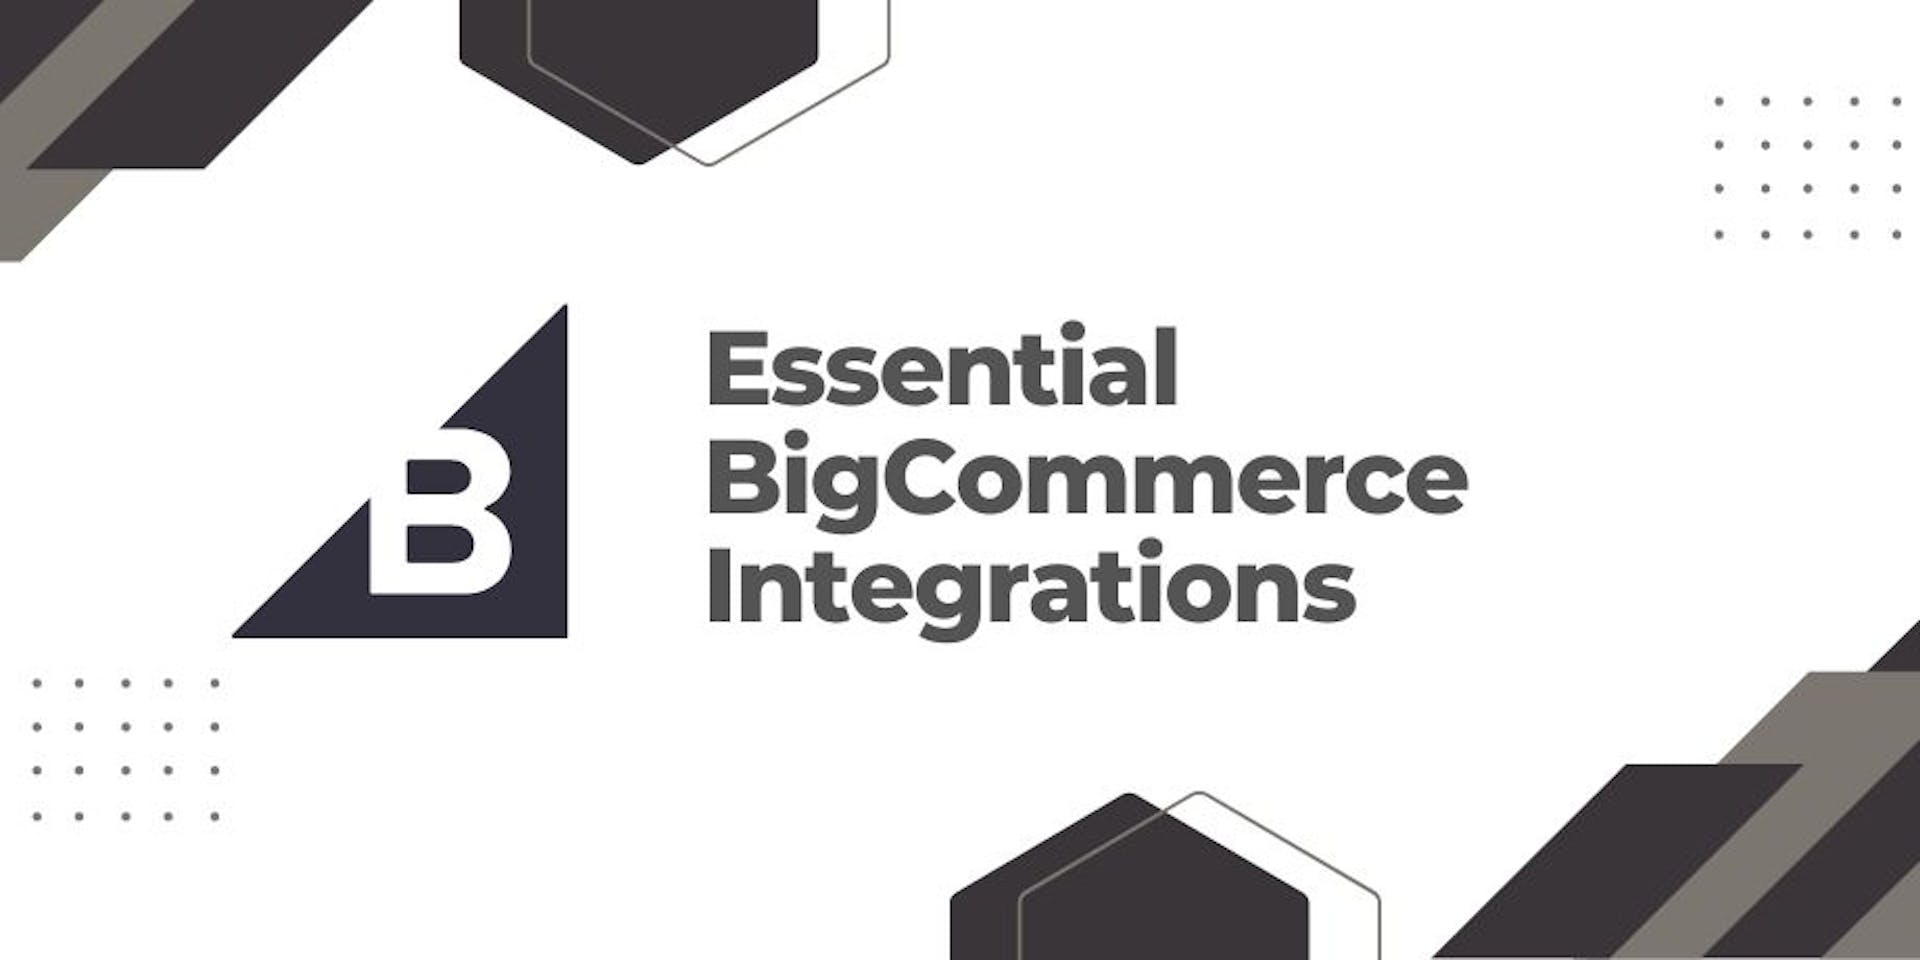 featured image - Top 8 Essential BigCommerce Integrations to Leverage!